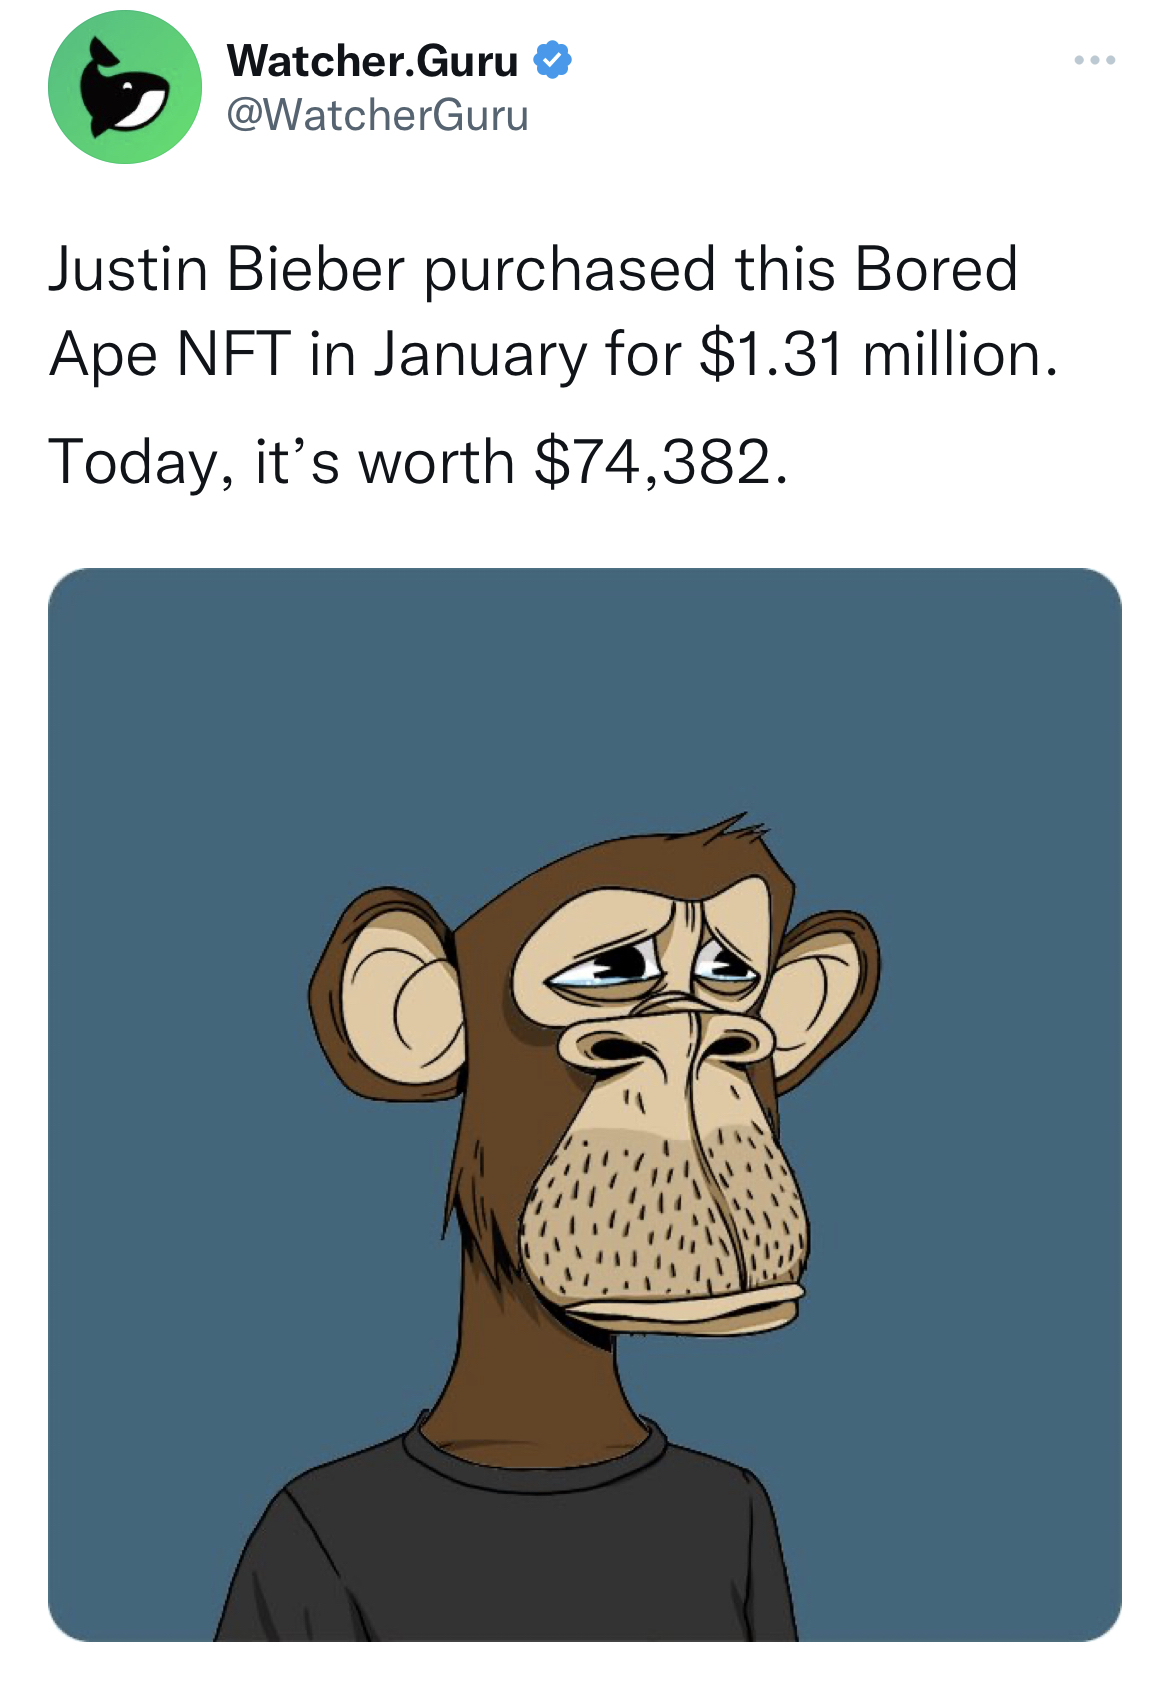 Tweets roasting celebrities - cartoon - Watcher.Guru Justin Bieber purchased this Bored Ape Nft in January for $1.31 million. Today, it's worth $74,382.